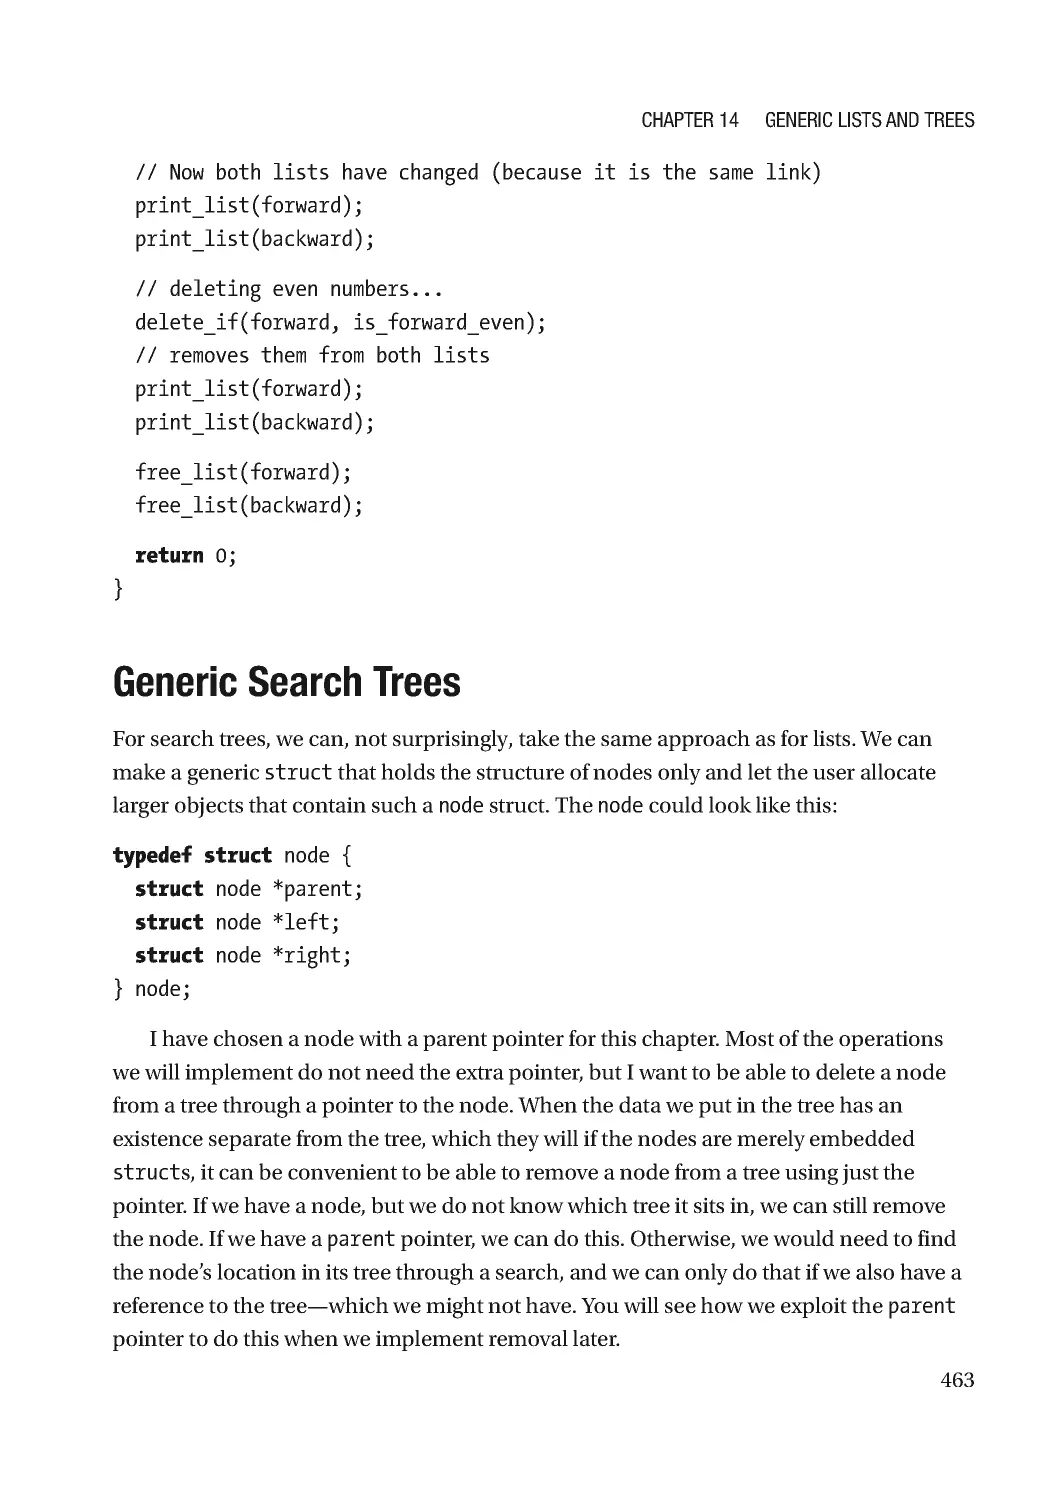 Generic Search Trees